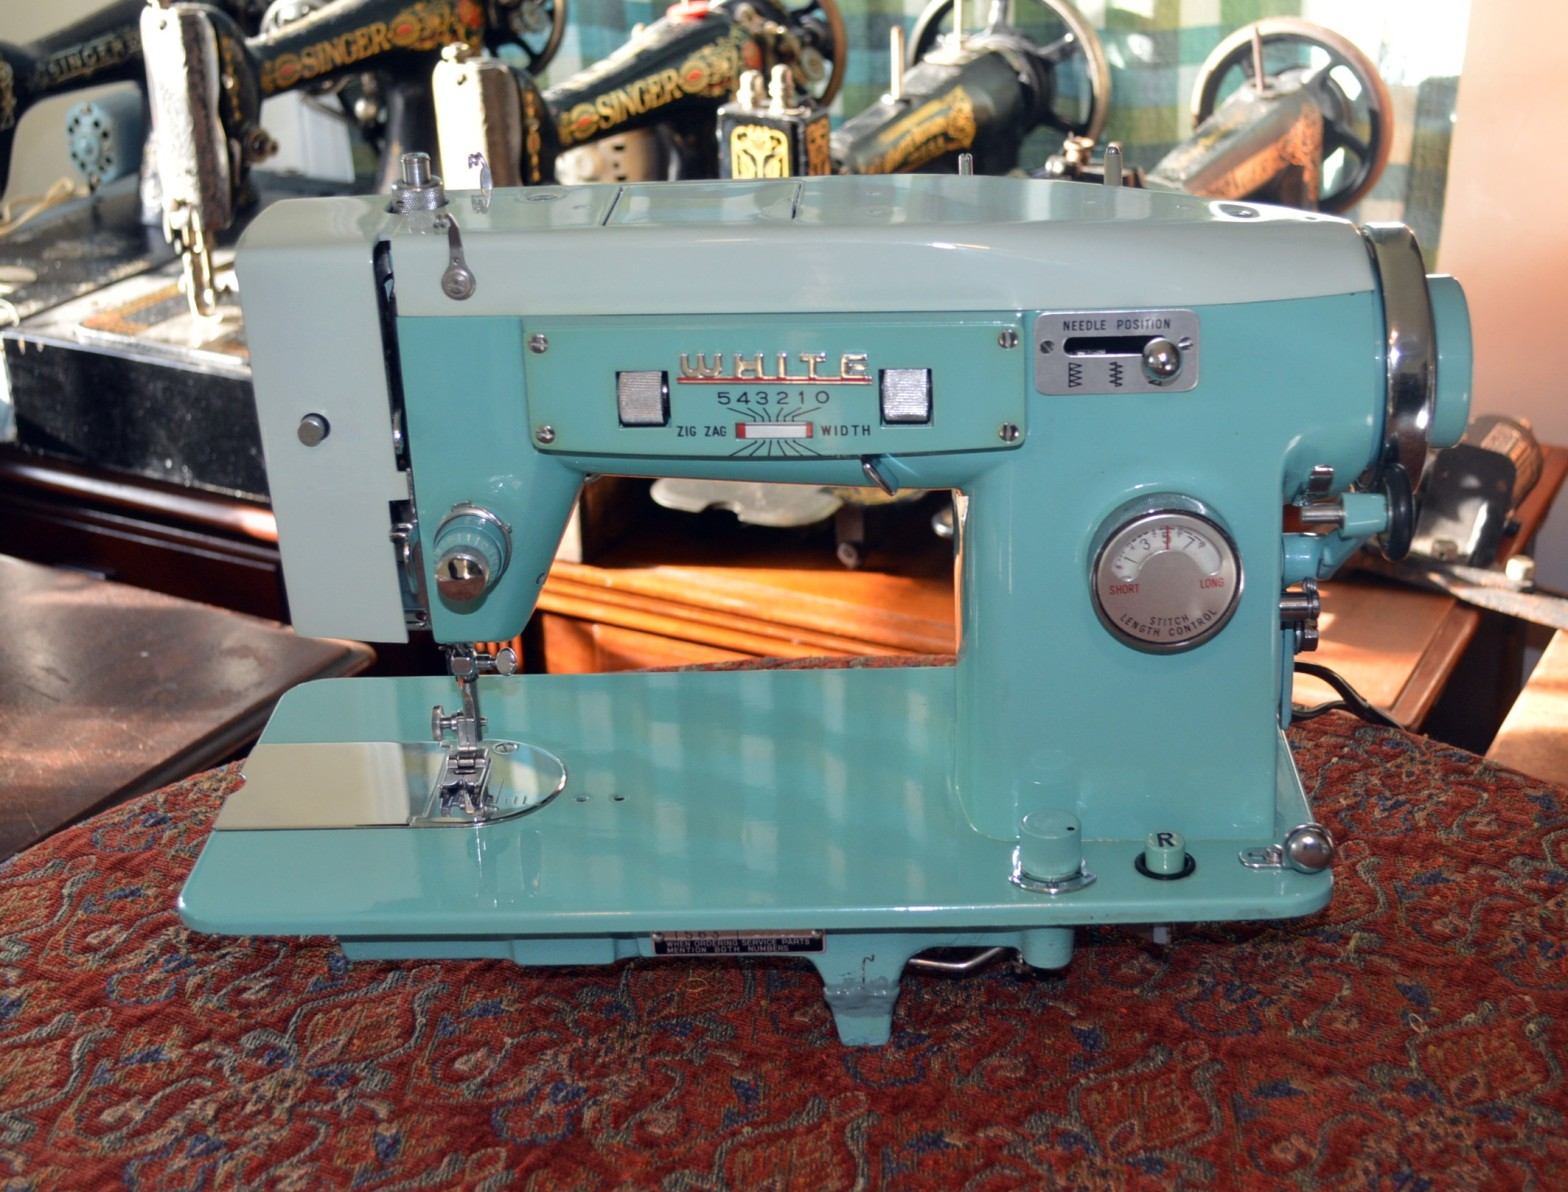 Restoration of a Vintage 1960's White Model 1563 All Metal Sewing